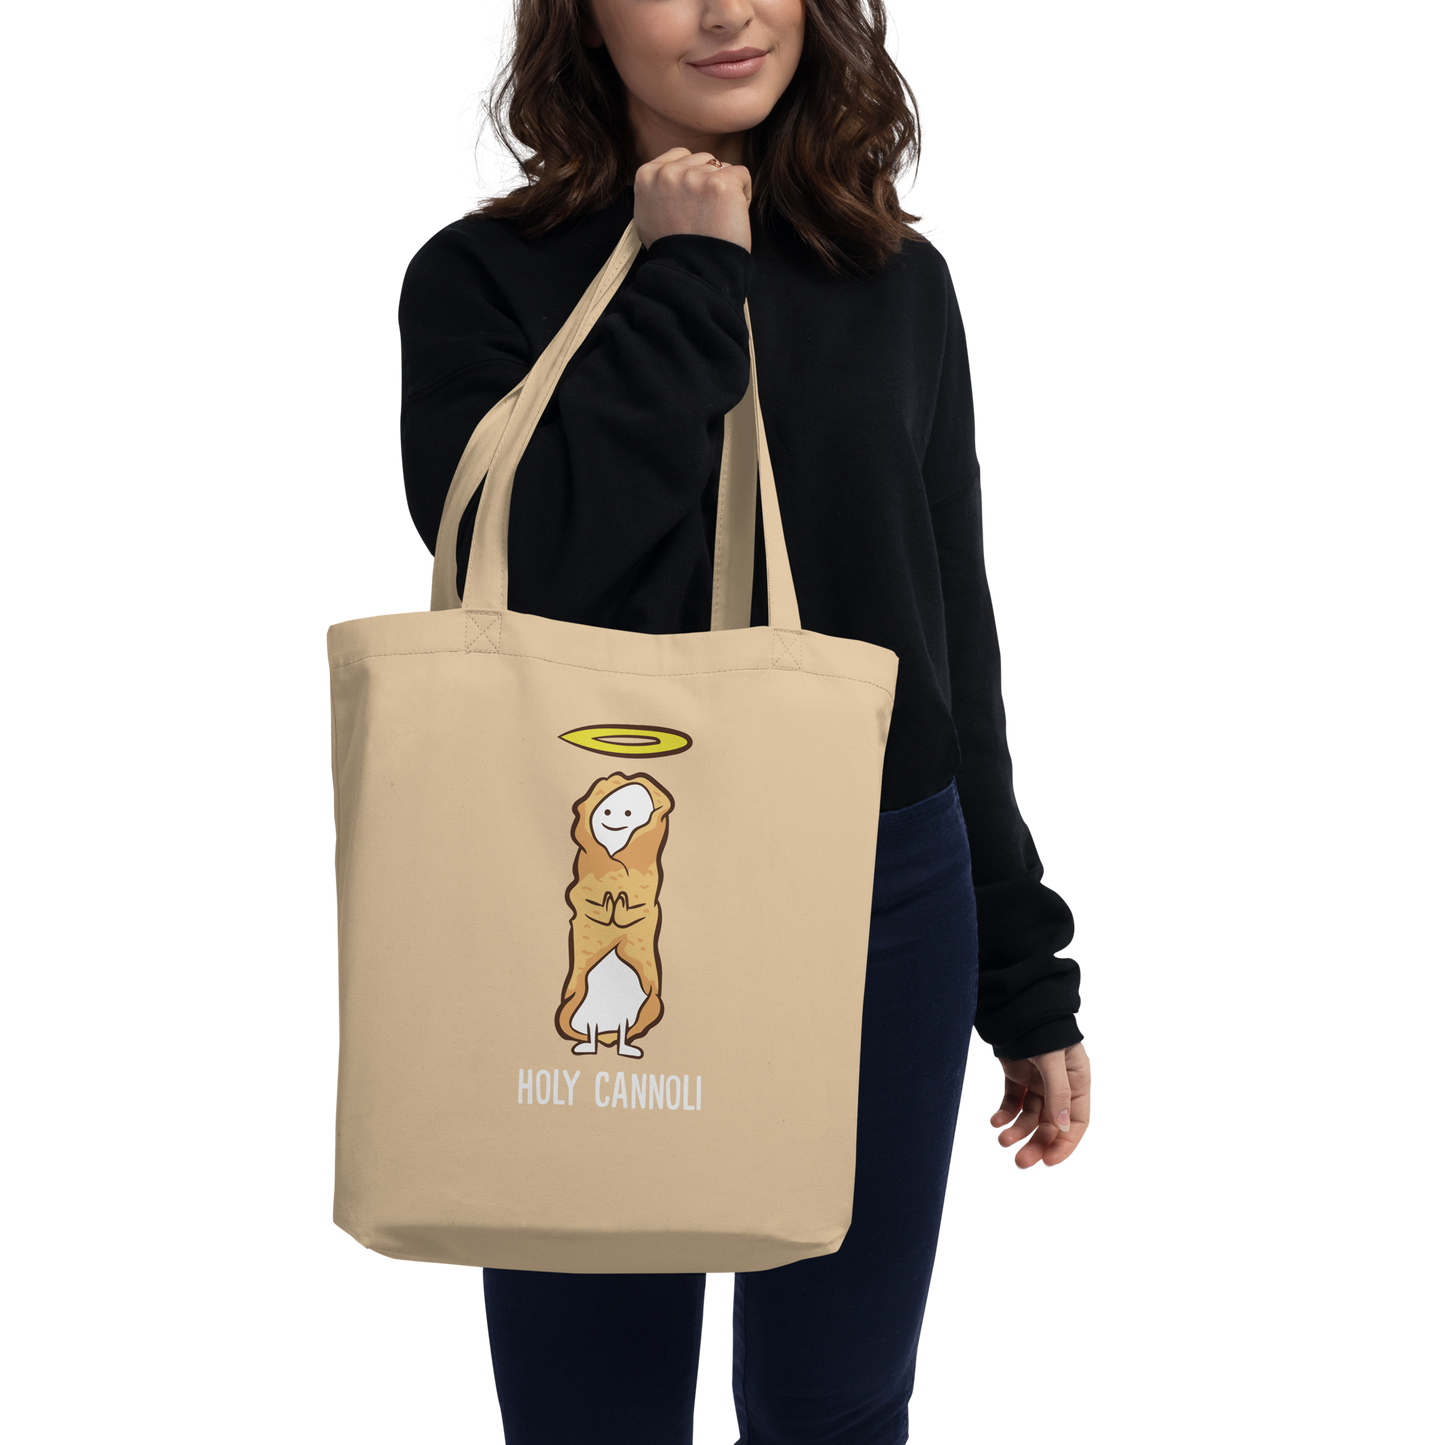 Holy Cannoli Cartoon Standard Tote Bag - Deliciously Playful Fashion Carryall